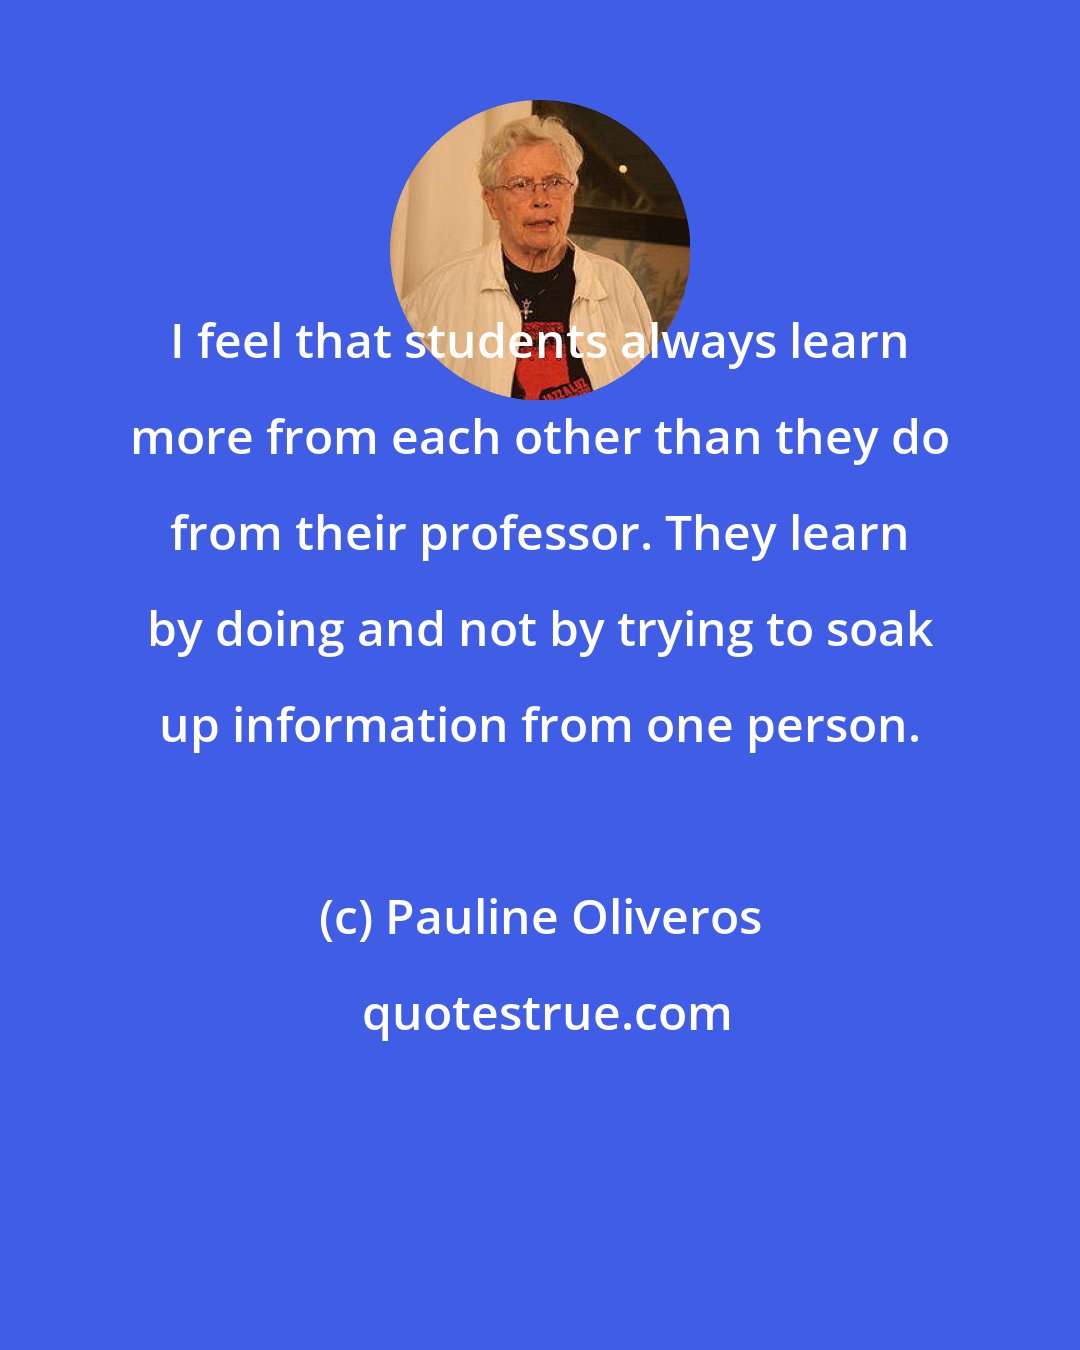 Pauline Oliveros: I feel that students always learn more from each other than they do from their professor. They learn by doing and not by trying to soak up information from one person.